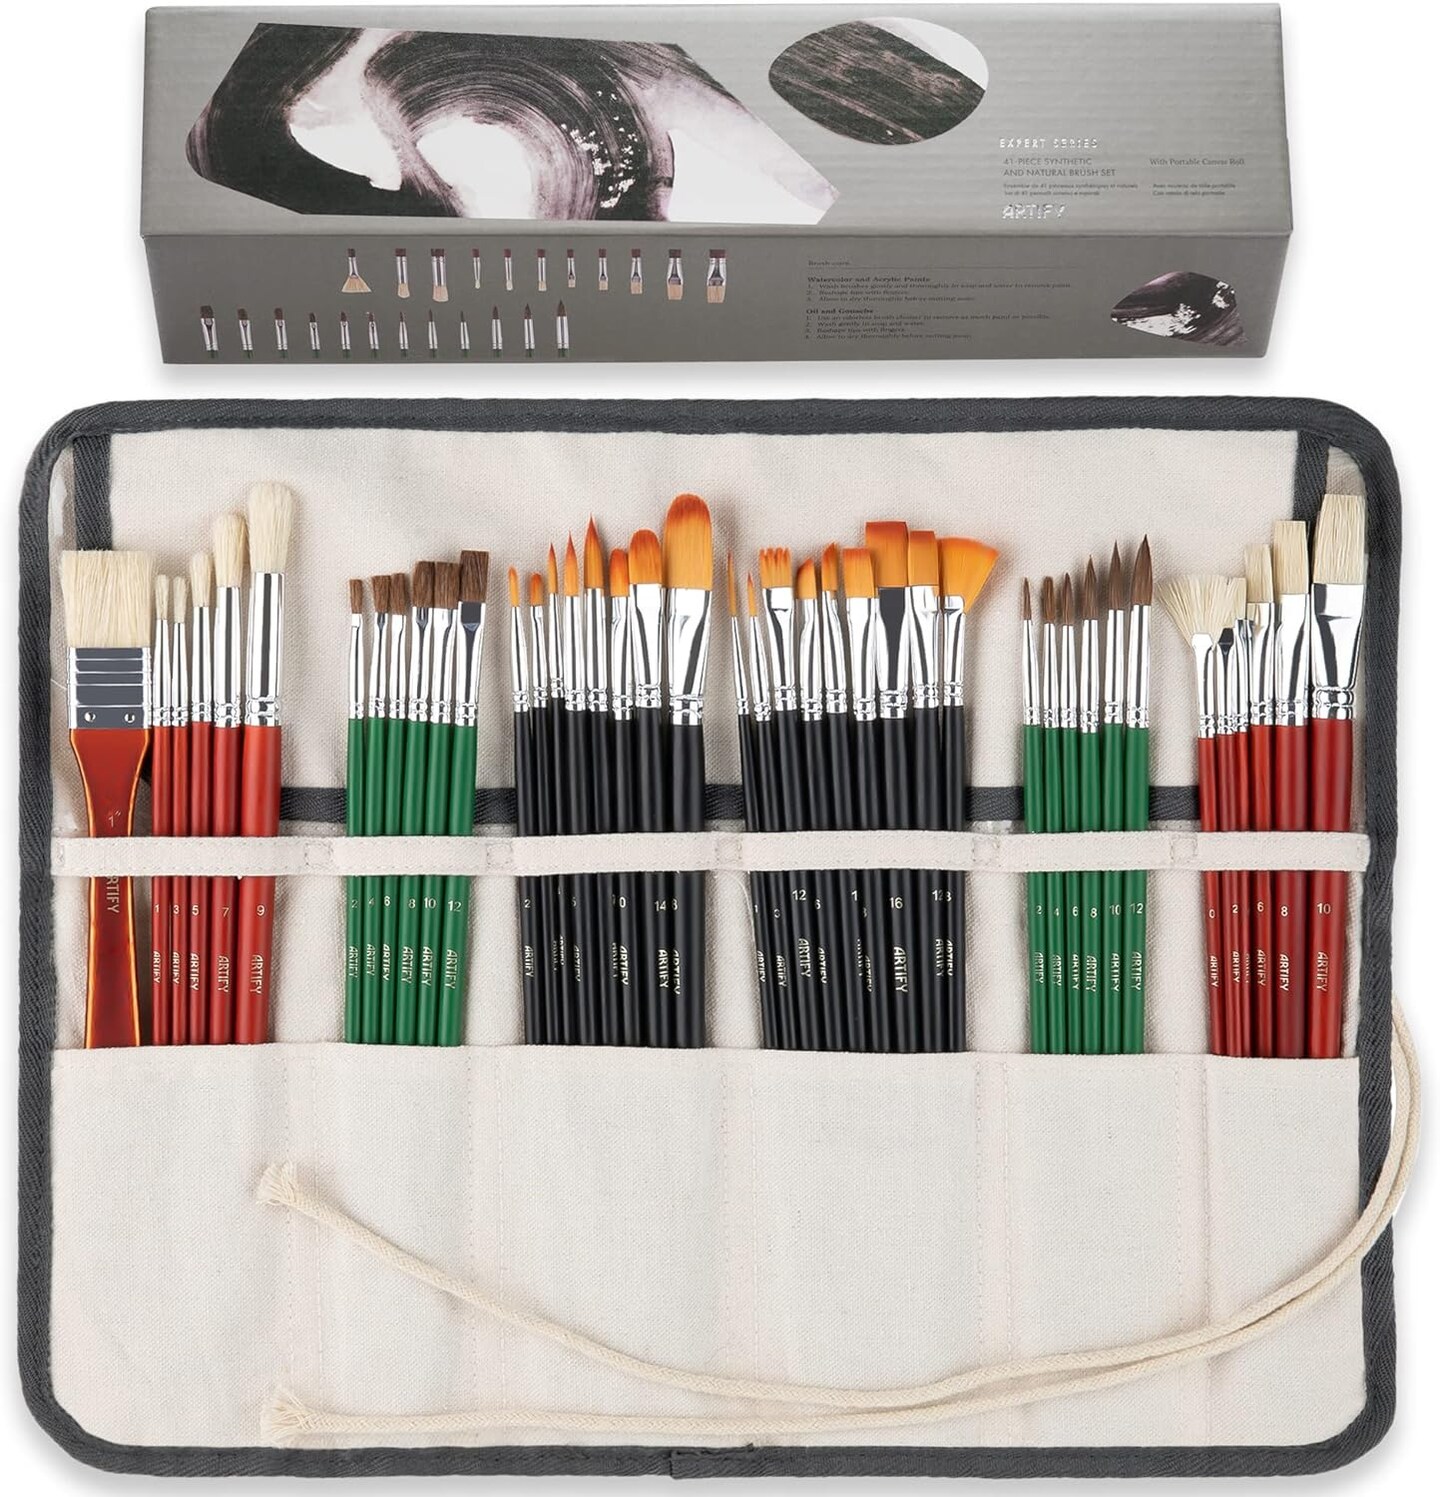 ARTIFY 41 Pieces Long Handle Paint Brushes, Expert Series, Hog Bristle, Horse Hair and Nylon Hairs Art Set Includes a Carrying Canvas Roll, for Acrylic, Oil, Watercolor and Gouache